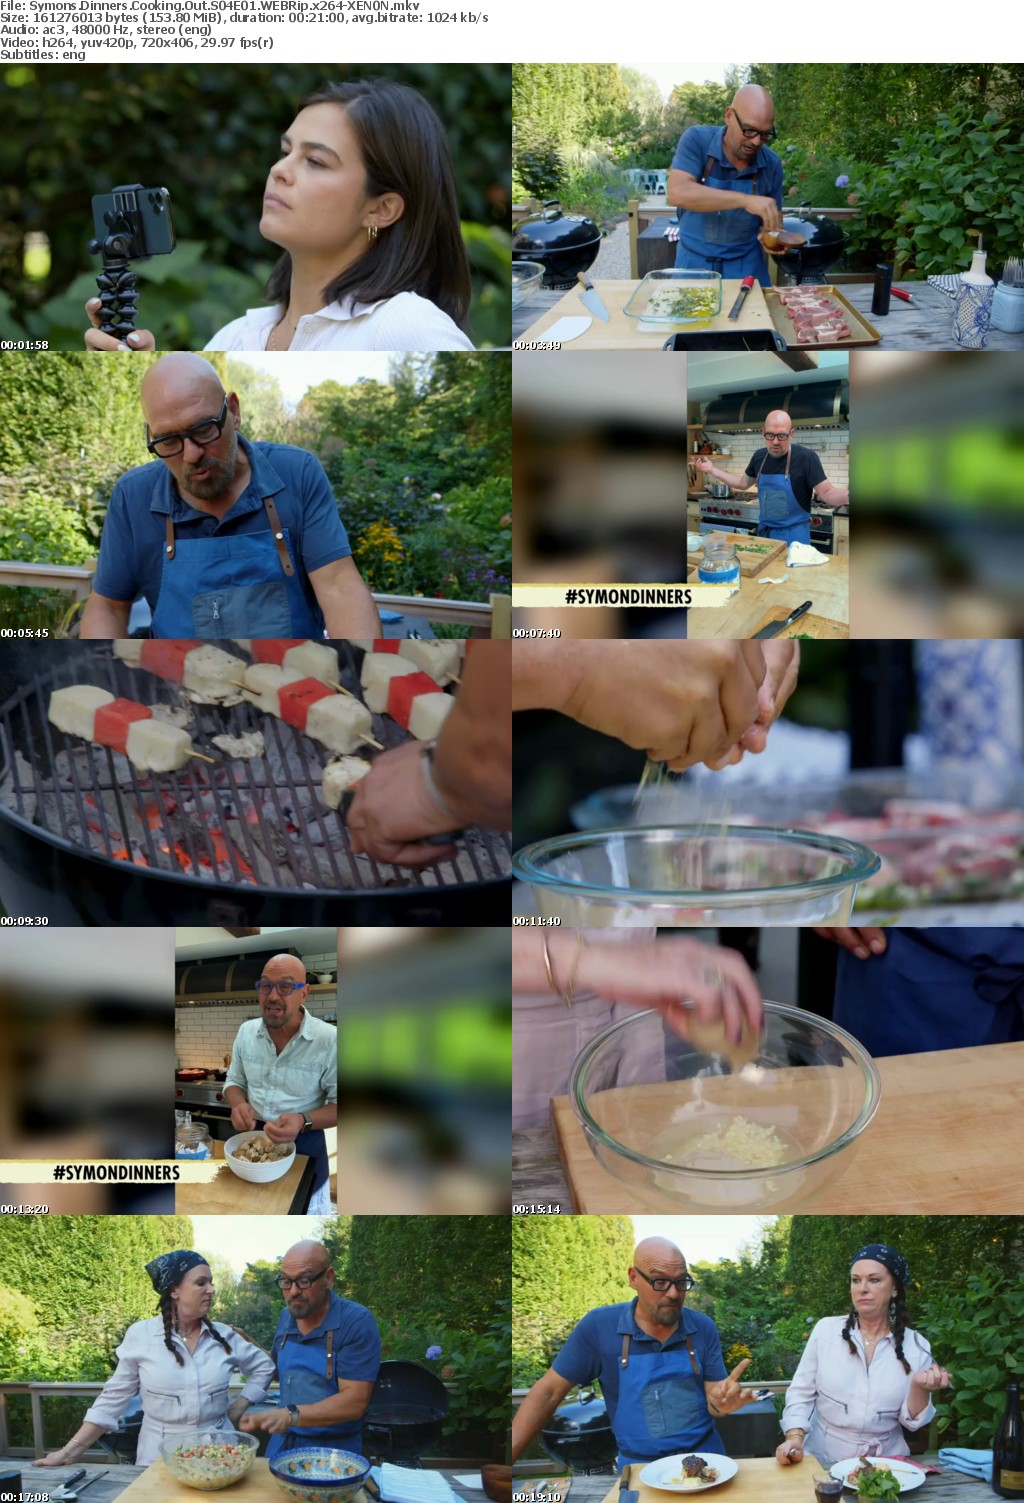 Symons Dinners Cooking Out S04E01 WEBRip x264-XEN0N